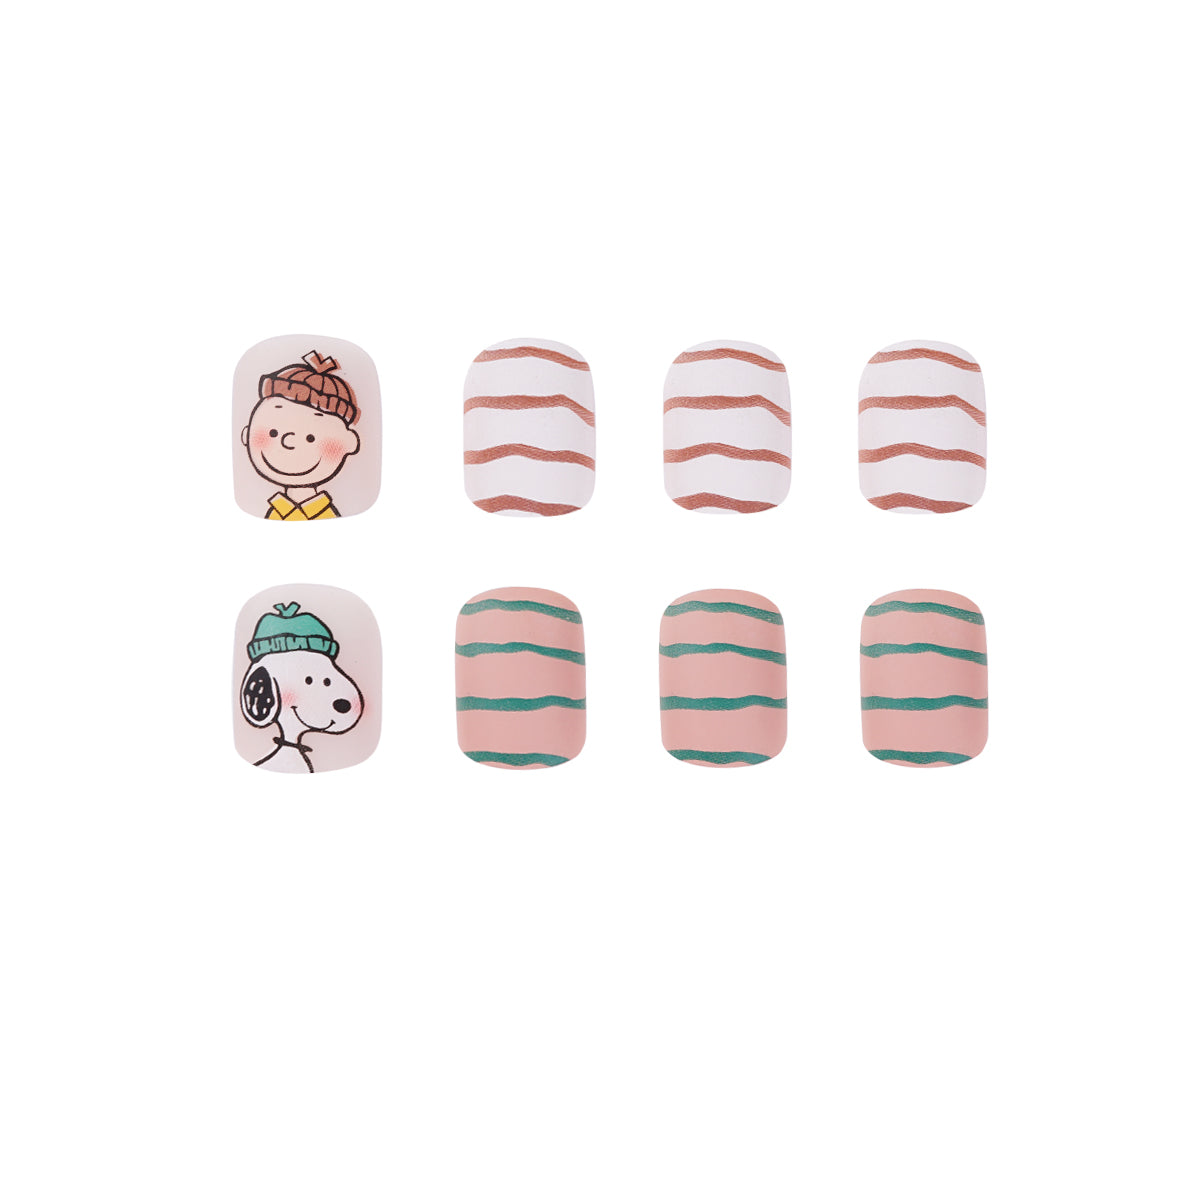 Charlie and Snoopy Short Oval Beige Cartoon Press On Nails